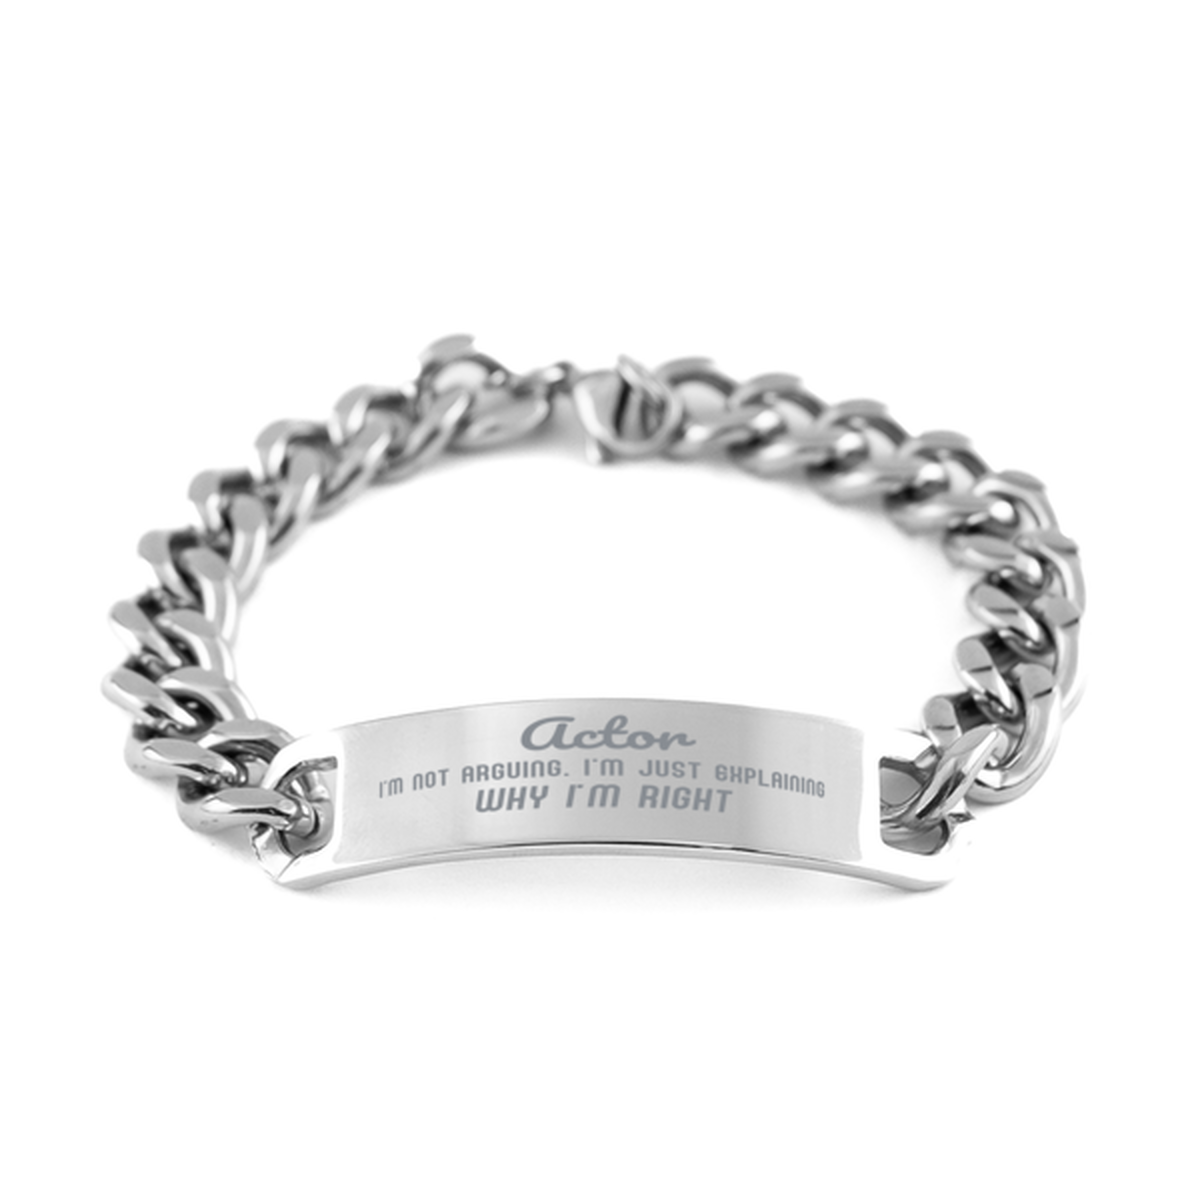 Actor I'm not Arguing. I'm Just Explaining Why I'm RIGHT Cuban Chain Stainless Steel Bracelet, Graduation Birthday Christmas Actor Gifts For Actor Funny Saying Quote Present for Men Women Coworker